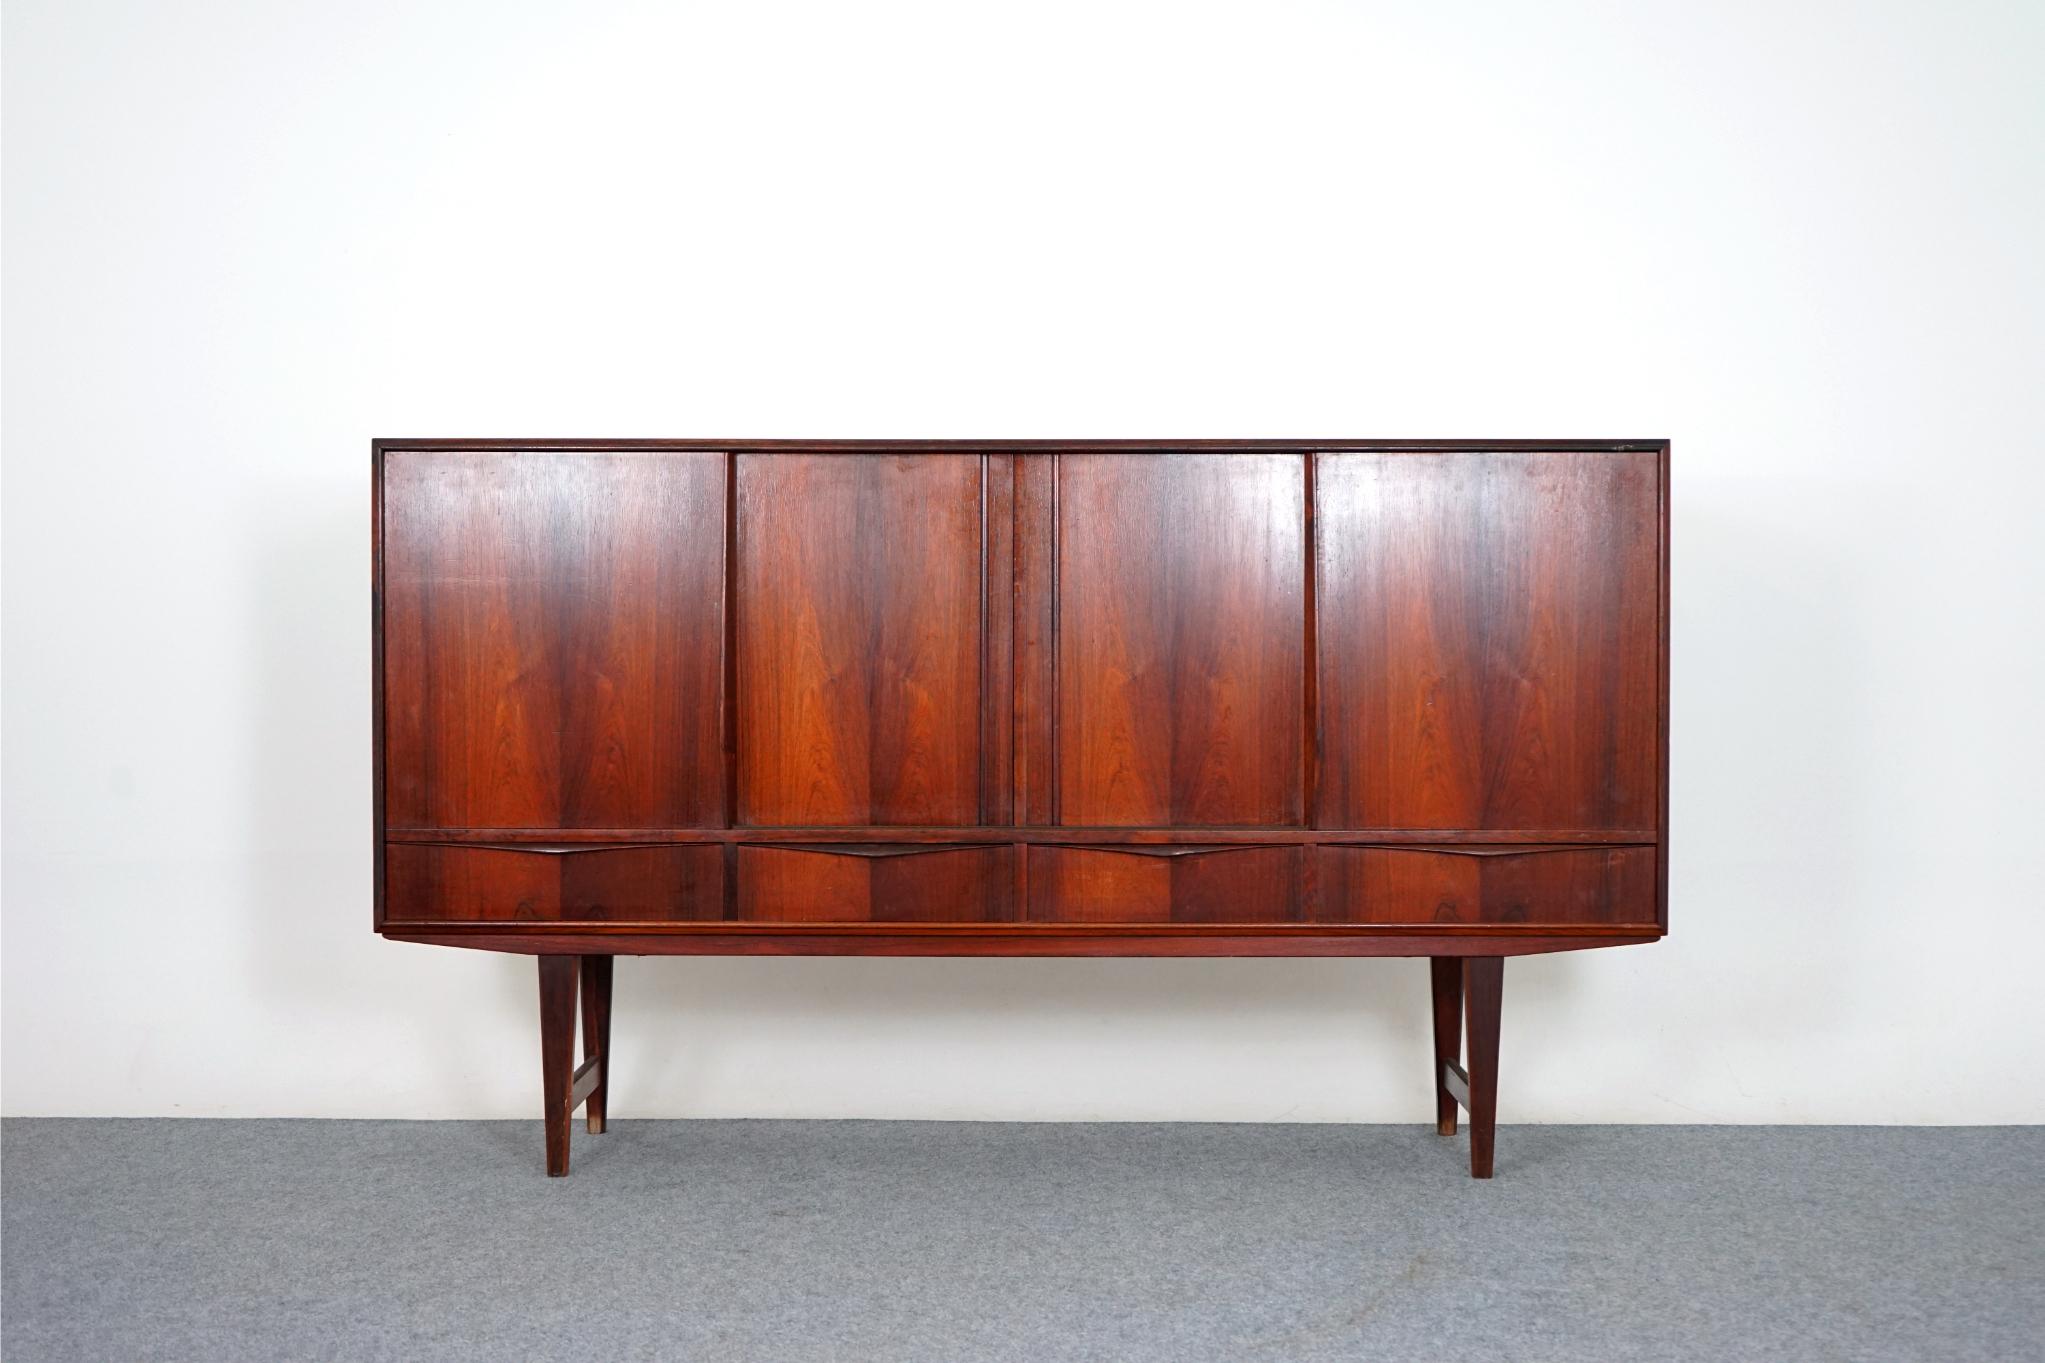 Rosewood Danish sideboard, circa 1960's. Clean, simple lined design highlights the exceptional book-matched veneer throughout. A combination of sliding doors and exterior drawers offers ample storage options. Interior bays are outfitted with